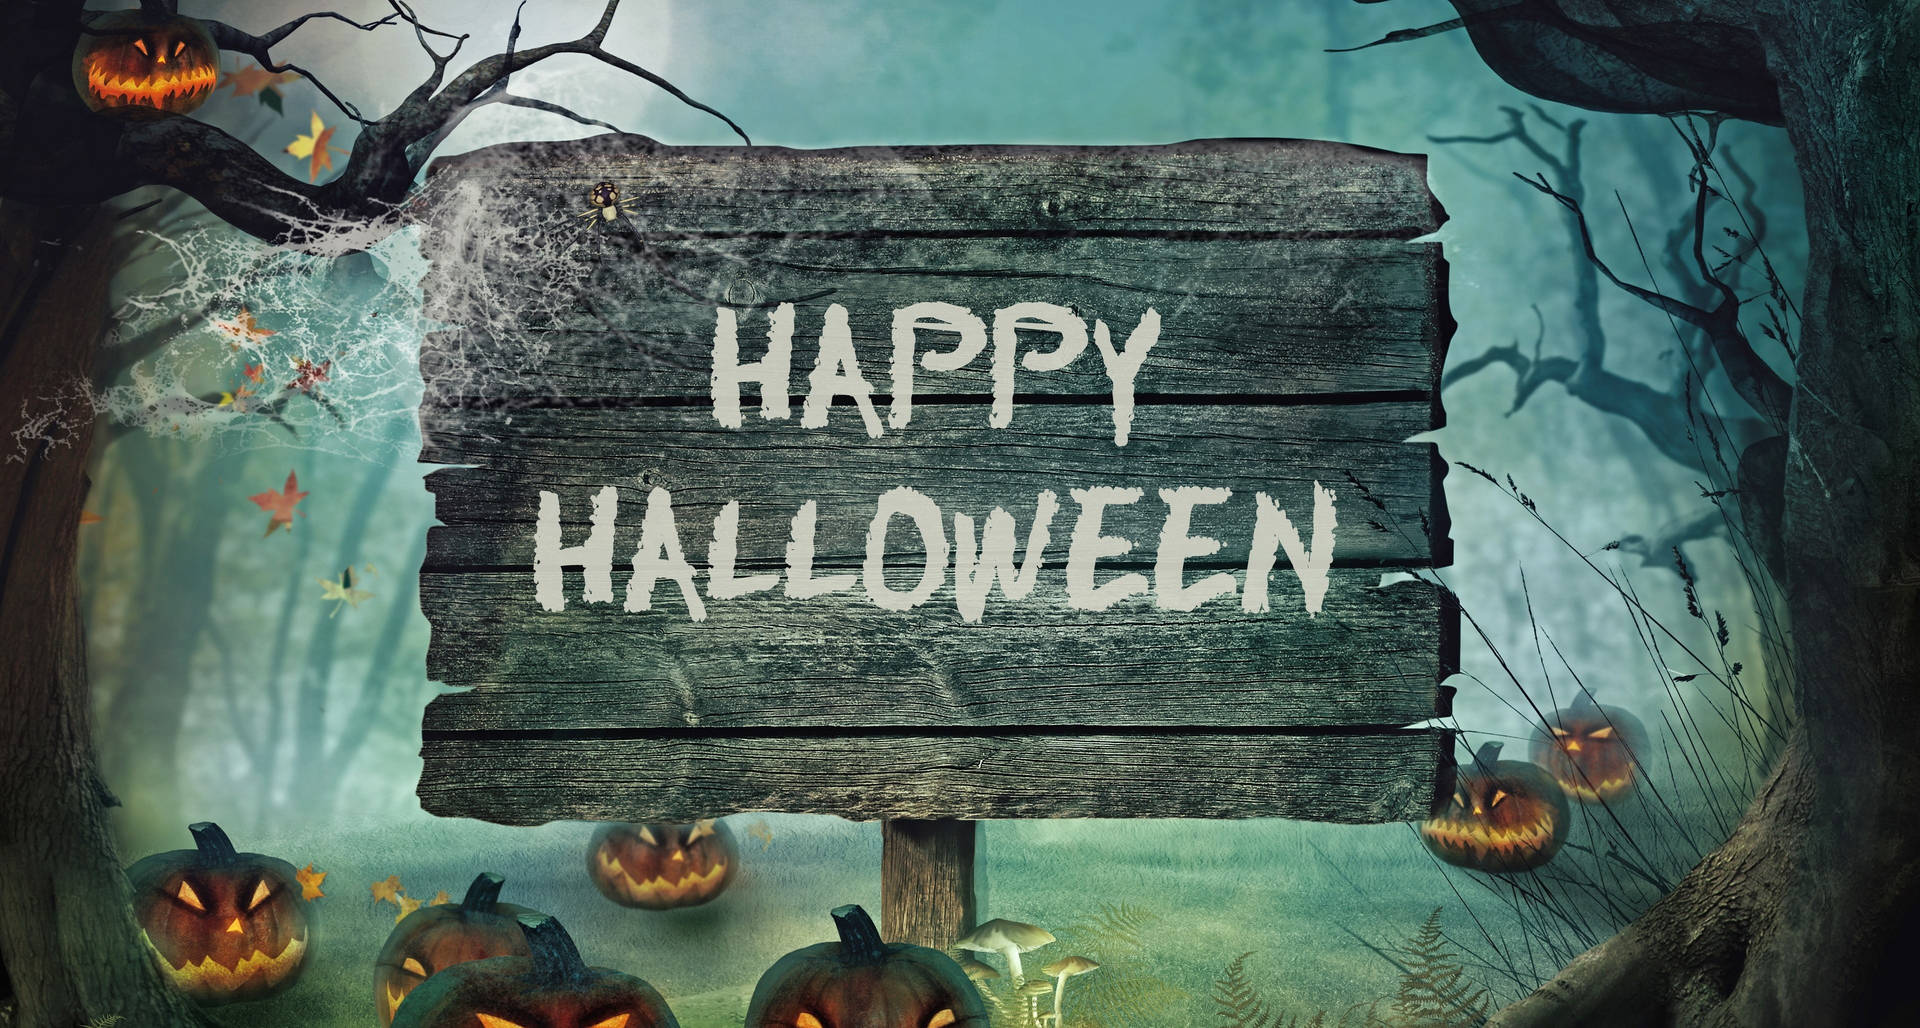 Get ready for a spooky Halloween! Wallpaper